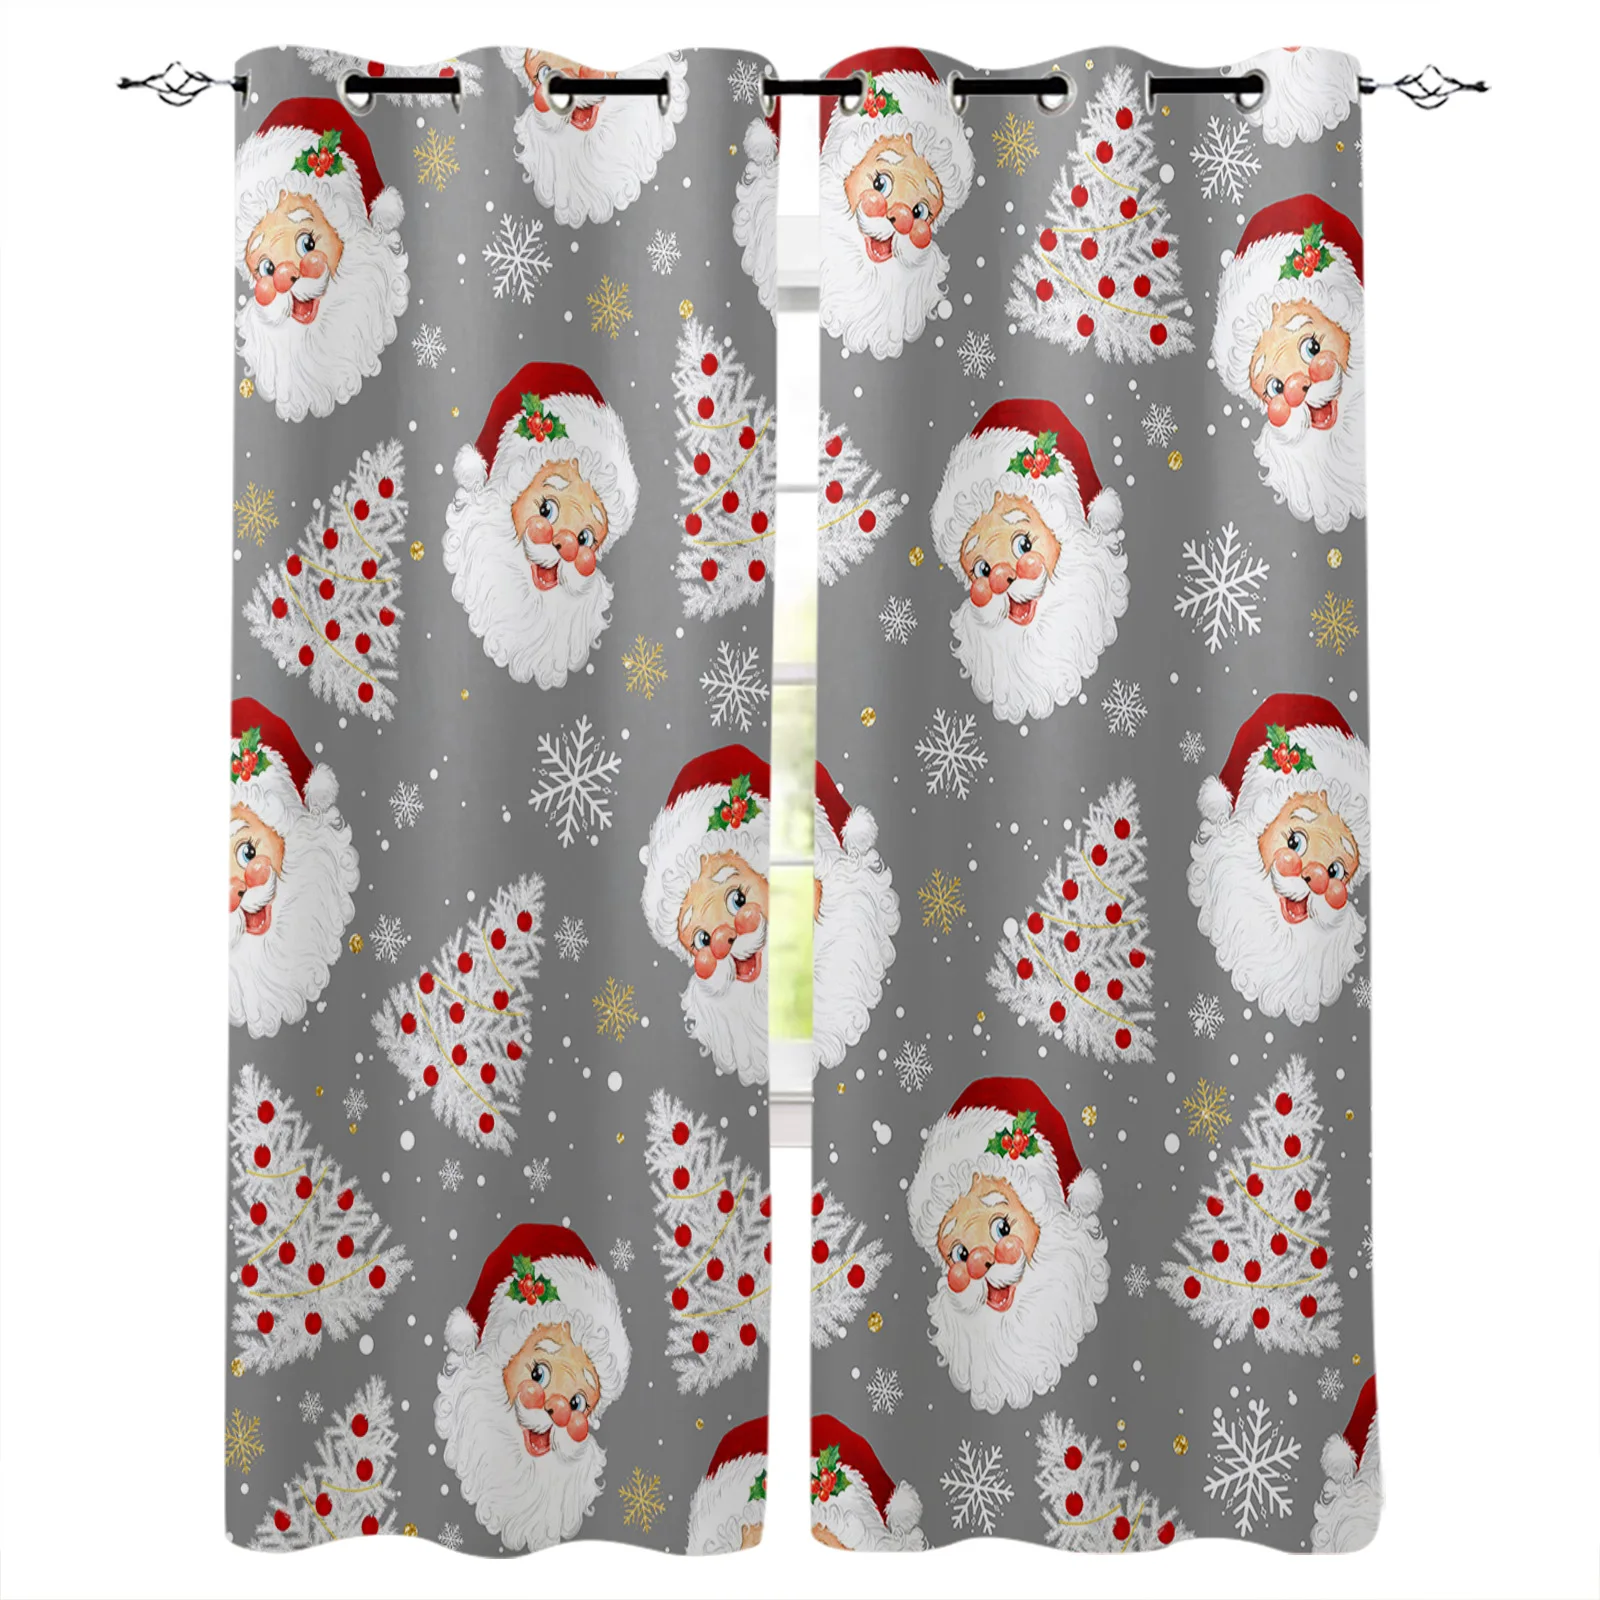 

Christmas Gray Santa Claus Snowflakes Window Curtains for Living Room Luxury Bedroom Decor Curtains Kitchen Balcony Drapes